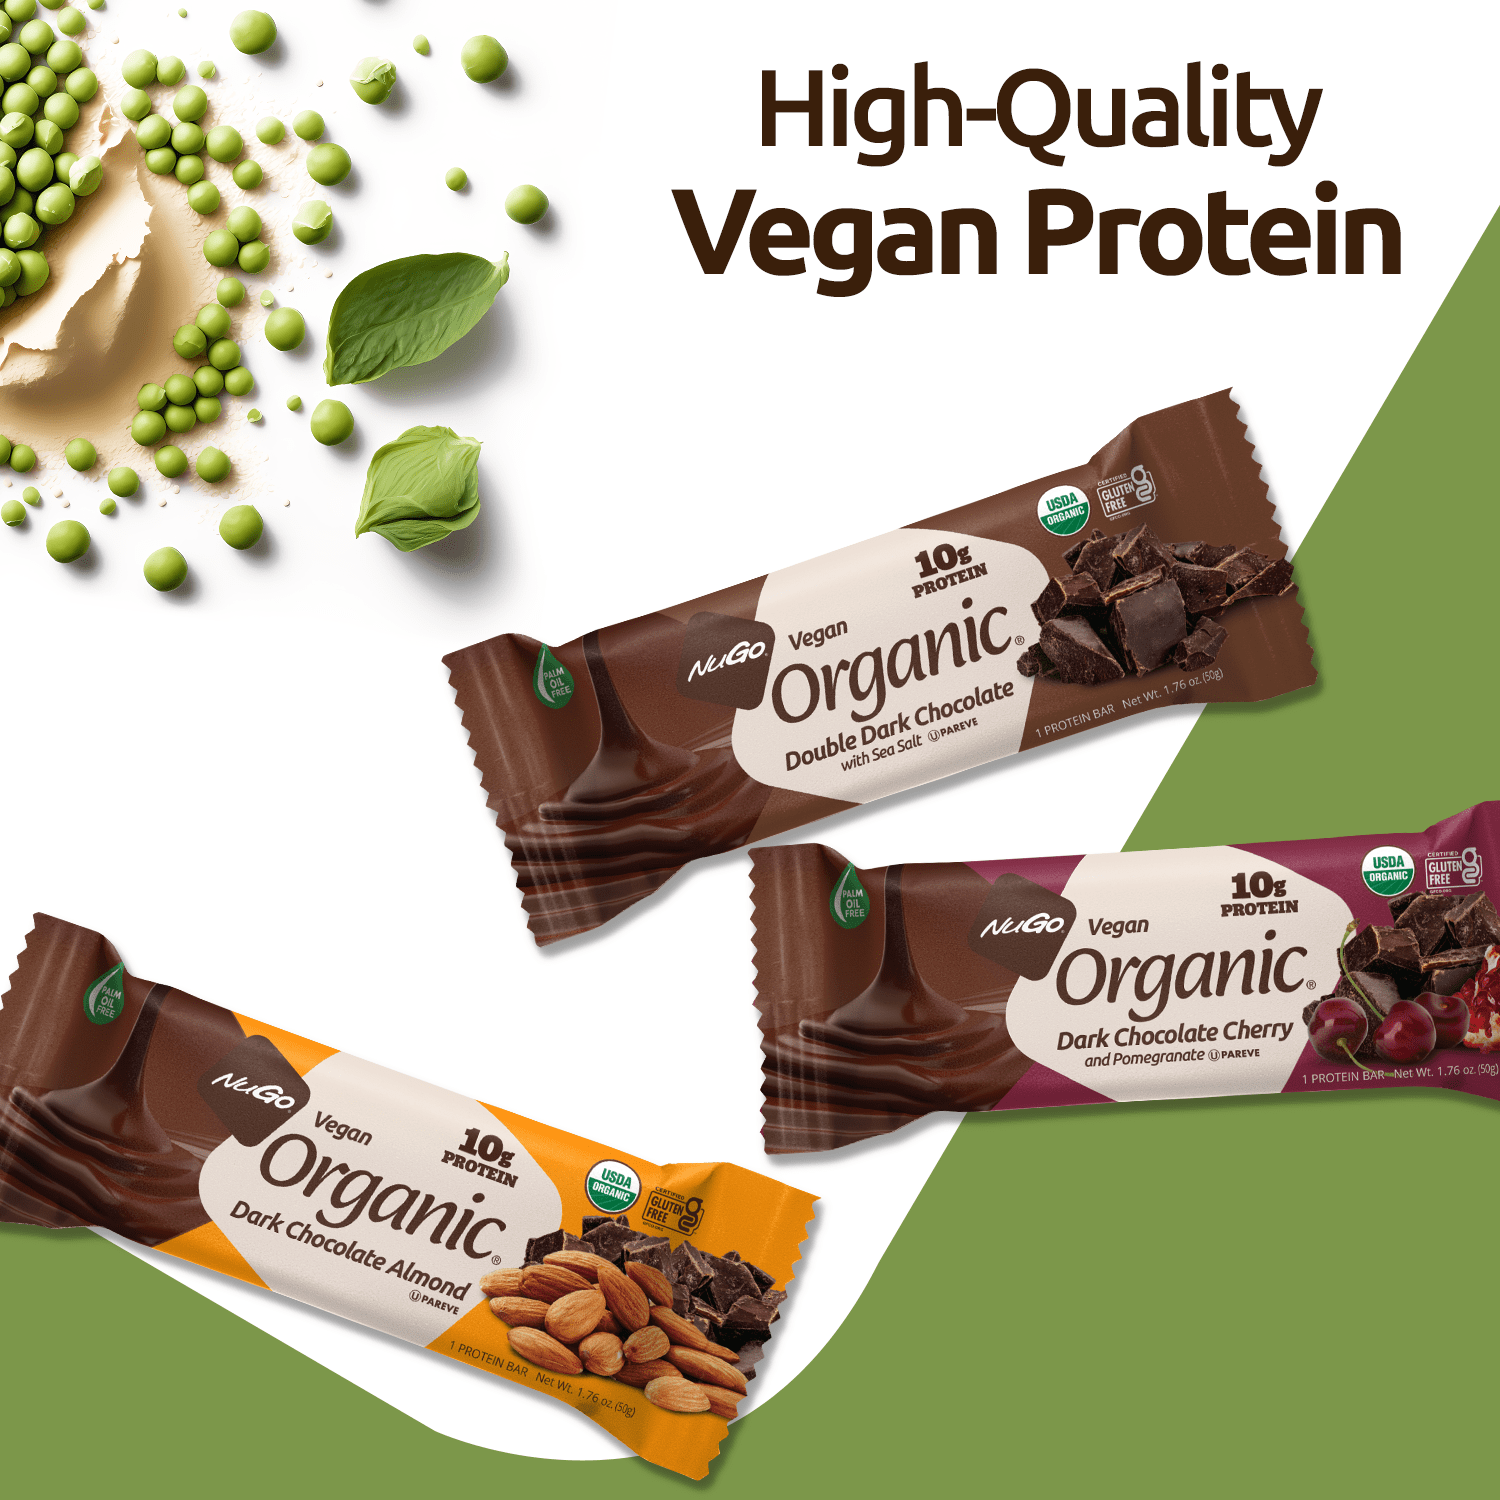 High Quality Vegan Protein Text Image